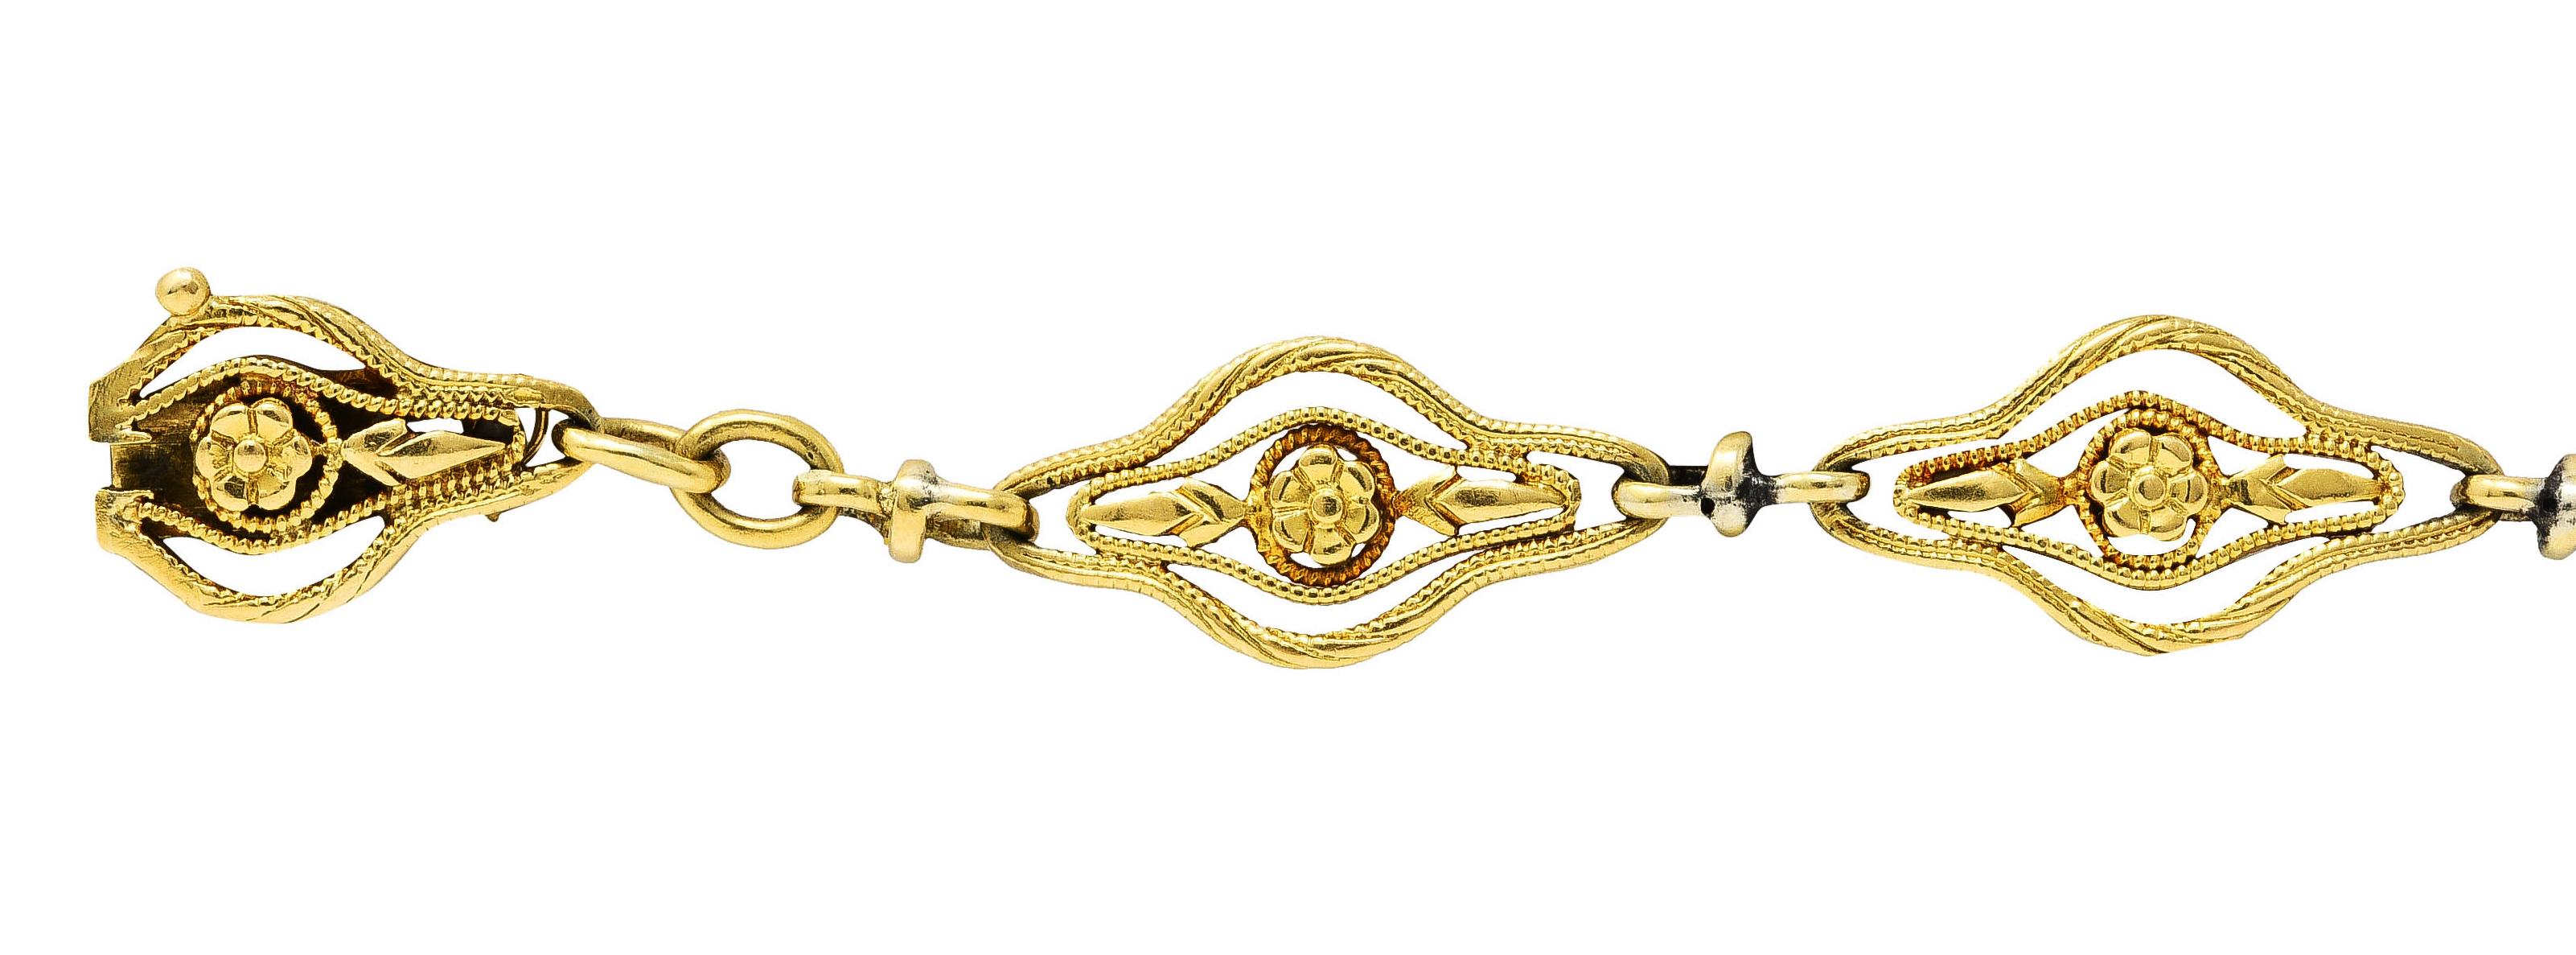 Bracelet is comprised of highly decorative navette links

With floral motif and milgrain wire

Separated by split oval spacer links

Completed by hidden clasp with safety chain and figure eight safety

With French assay marks for 18 karat gold

With